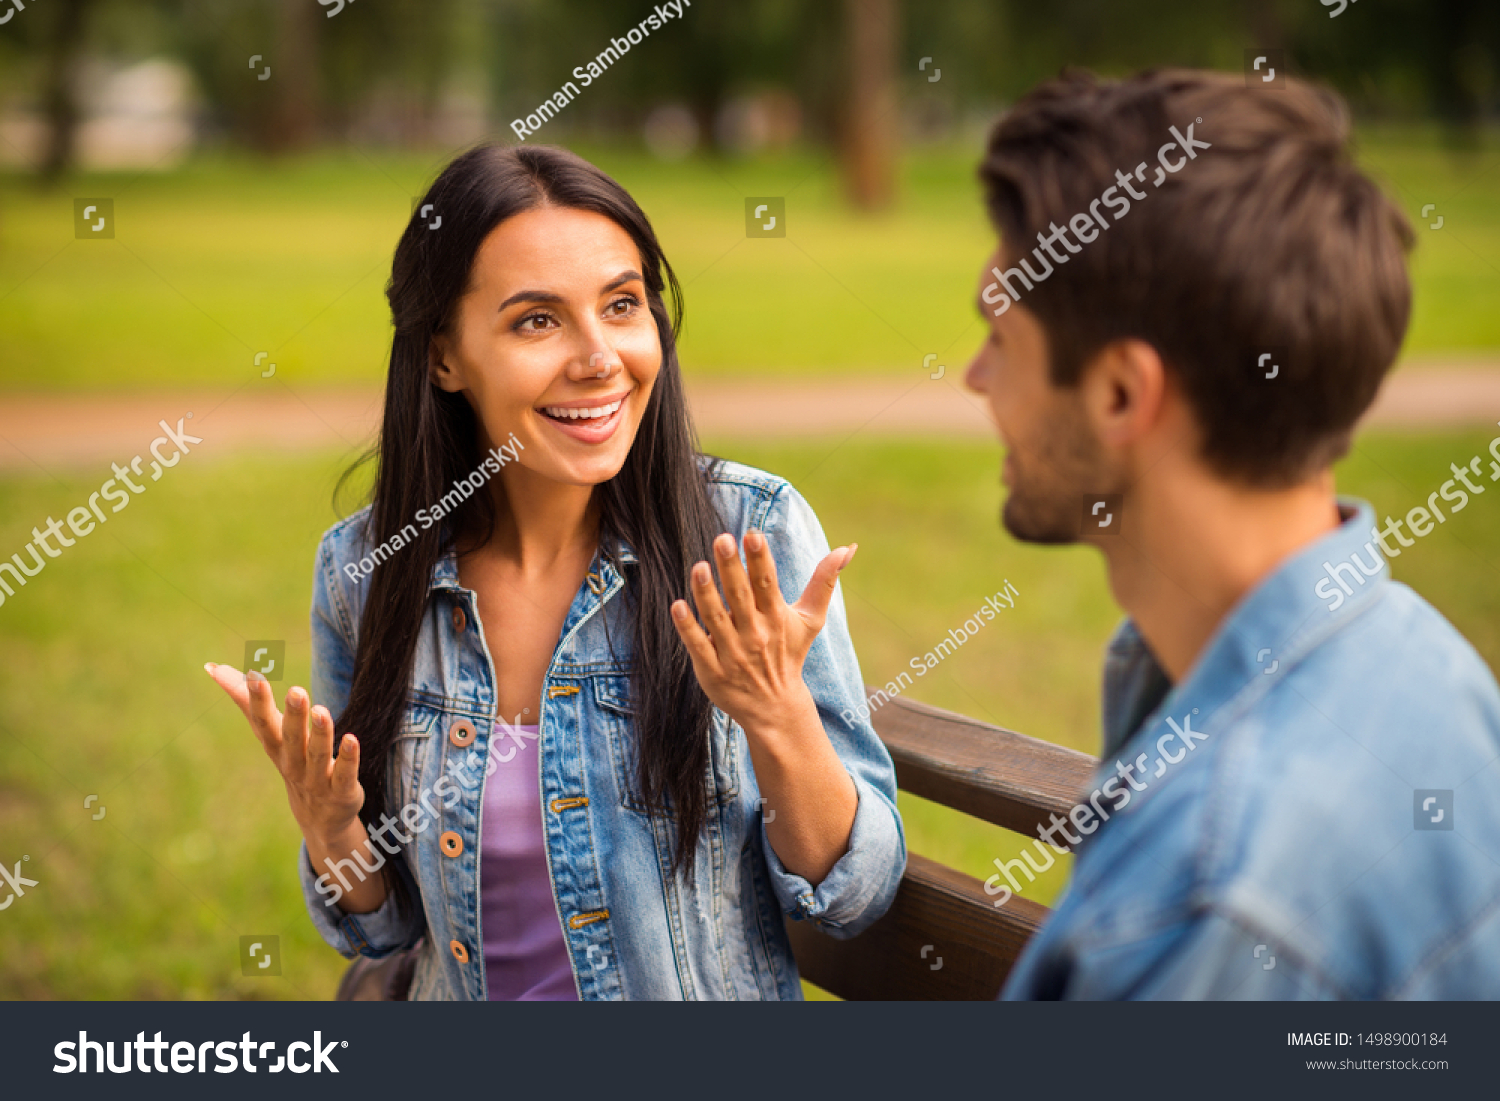 Close-up portrait of his he her she nice attractive lovely charming cute cheerful cheery friends wearing denim girl telling sharing news story spending free time in green wood forest outdoors #1498900184